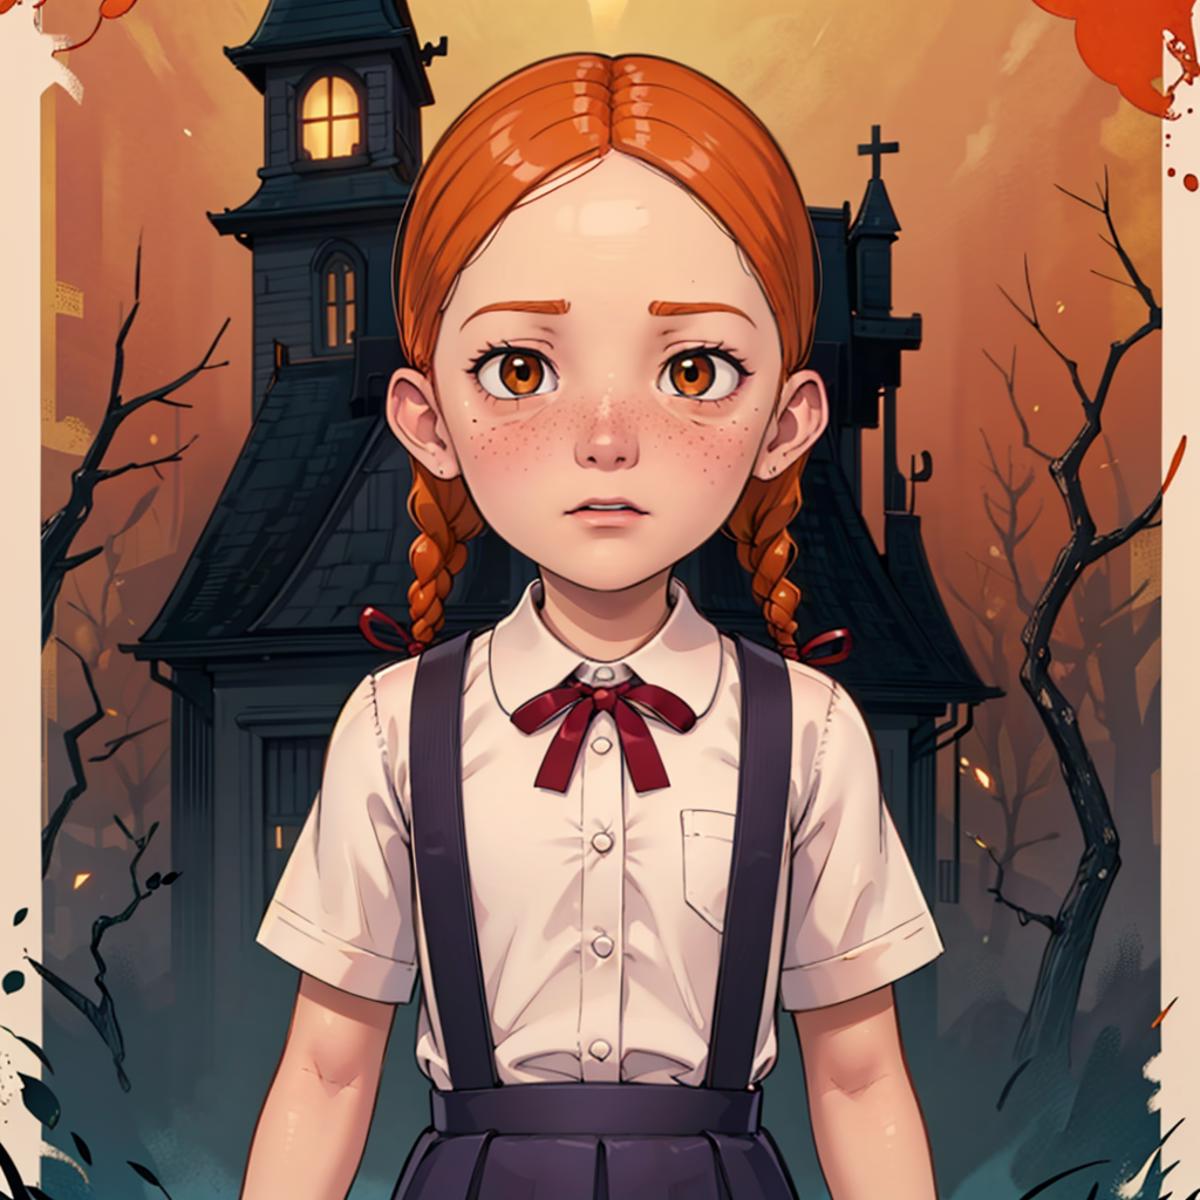 A young girl dressed in a white shirt, red tie, and suspenders stands in front of a haunted house.